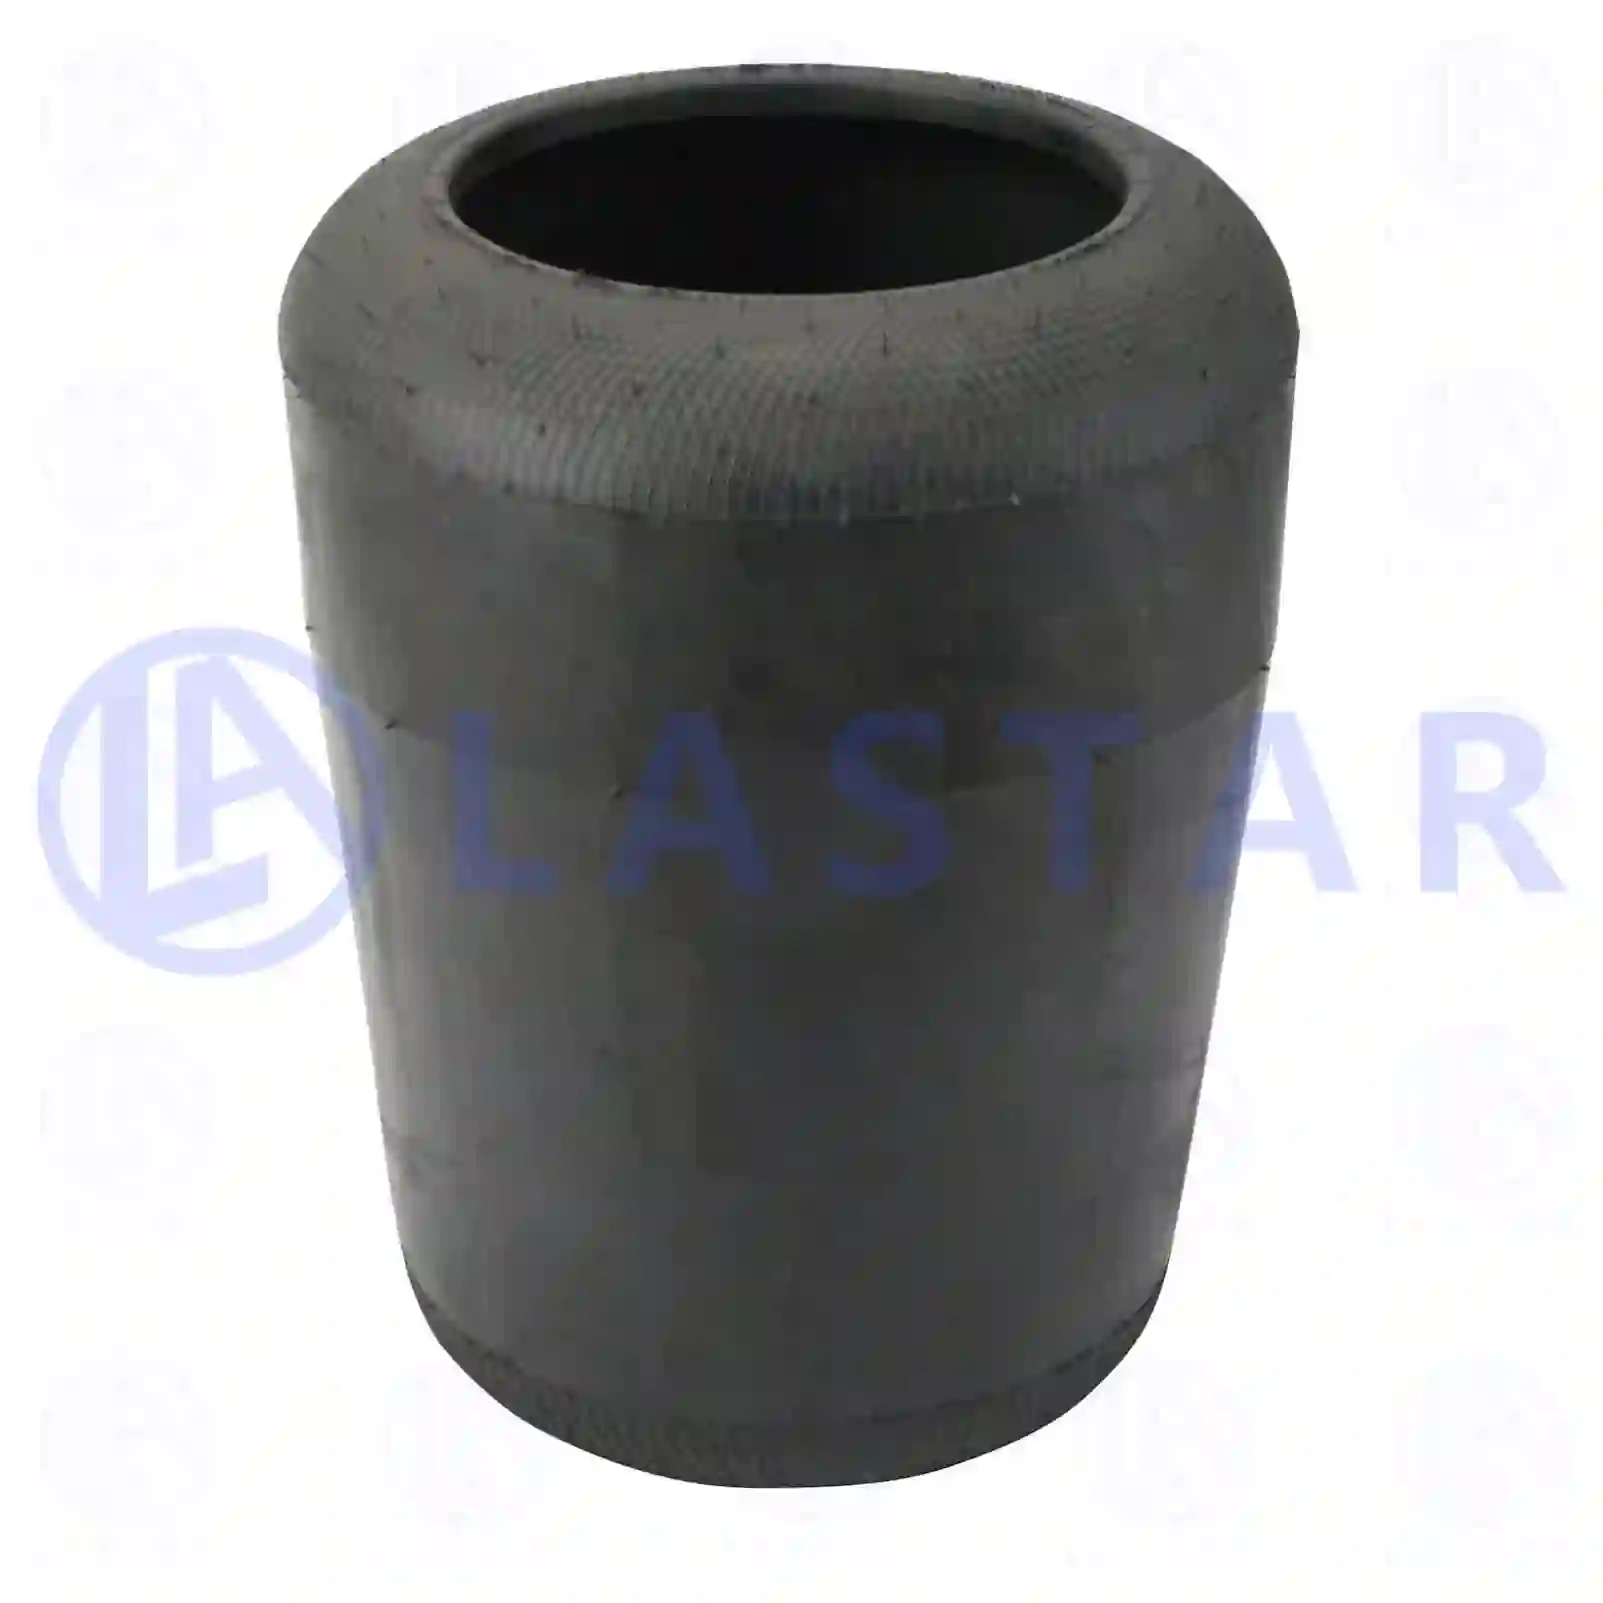 Air spring, without piston, 77729004, 0220024200, 0644425, 644425, 831895, 196035, 700196035, 81436010049, 81436010051, 81436010052, 81440500096, 3823277101, 102100300, MLF7087, 4731013000, 624319460, 624319680, ZG40826-0008 ||  77729004 Lastar Spare Part | Truck Spare Parts, Auotomotive Spare Parts Air spring, without piston, 77729004, 0220024200, 0644425, 644425, 831895, 196035, 700196035, 81436010049, 81436010051, 81436010052, 81440500096, 3823277101, 102100300, MLF7087, 4731013000, 624319460, 624319680, ZG40826-0008 ||  77729004 Lastar Spare Part | Truck Spare Parts, Auotomotive Spare Parts